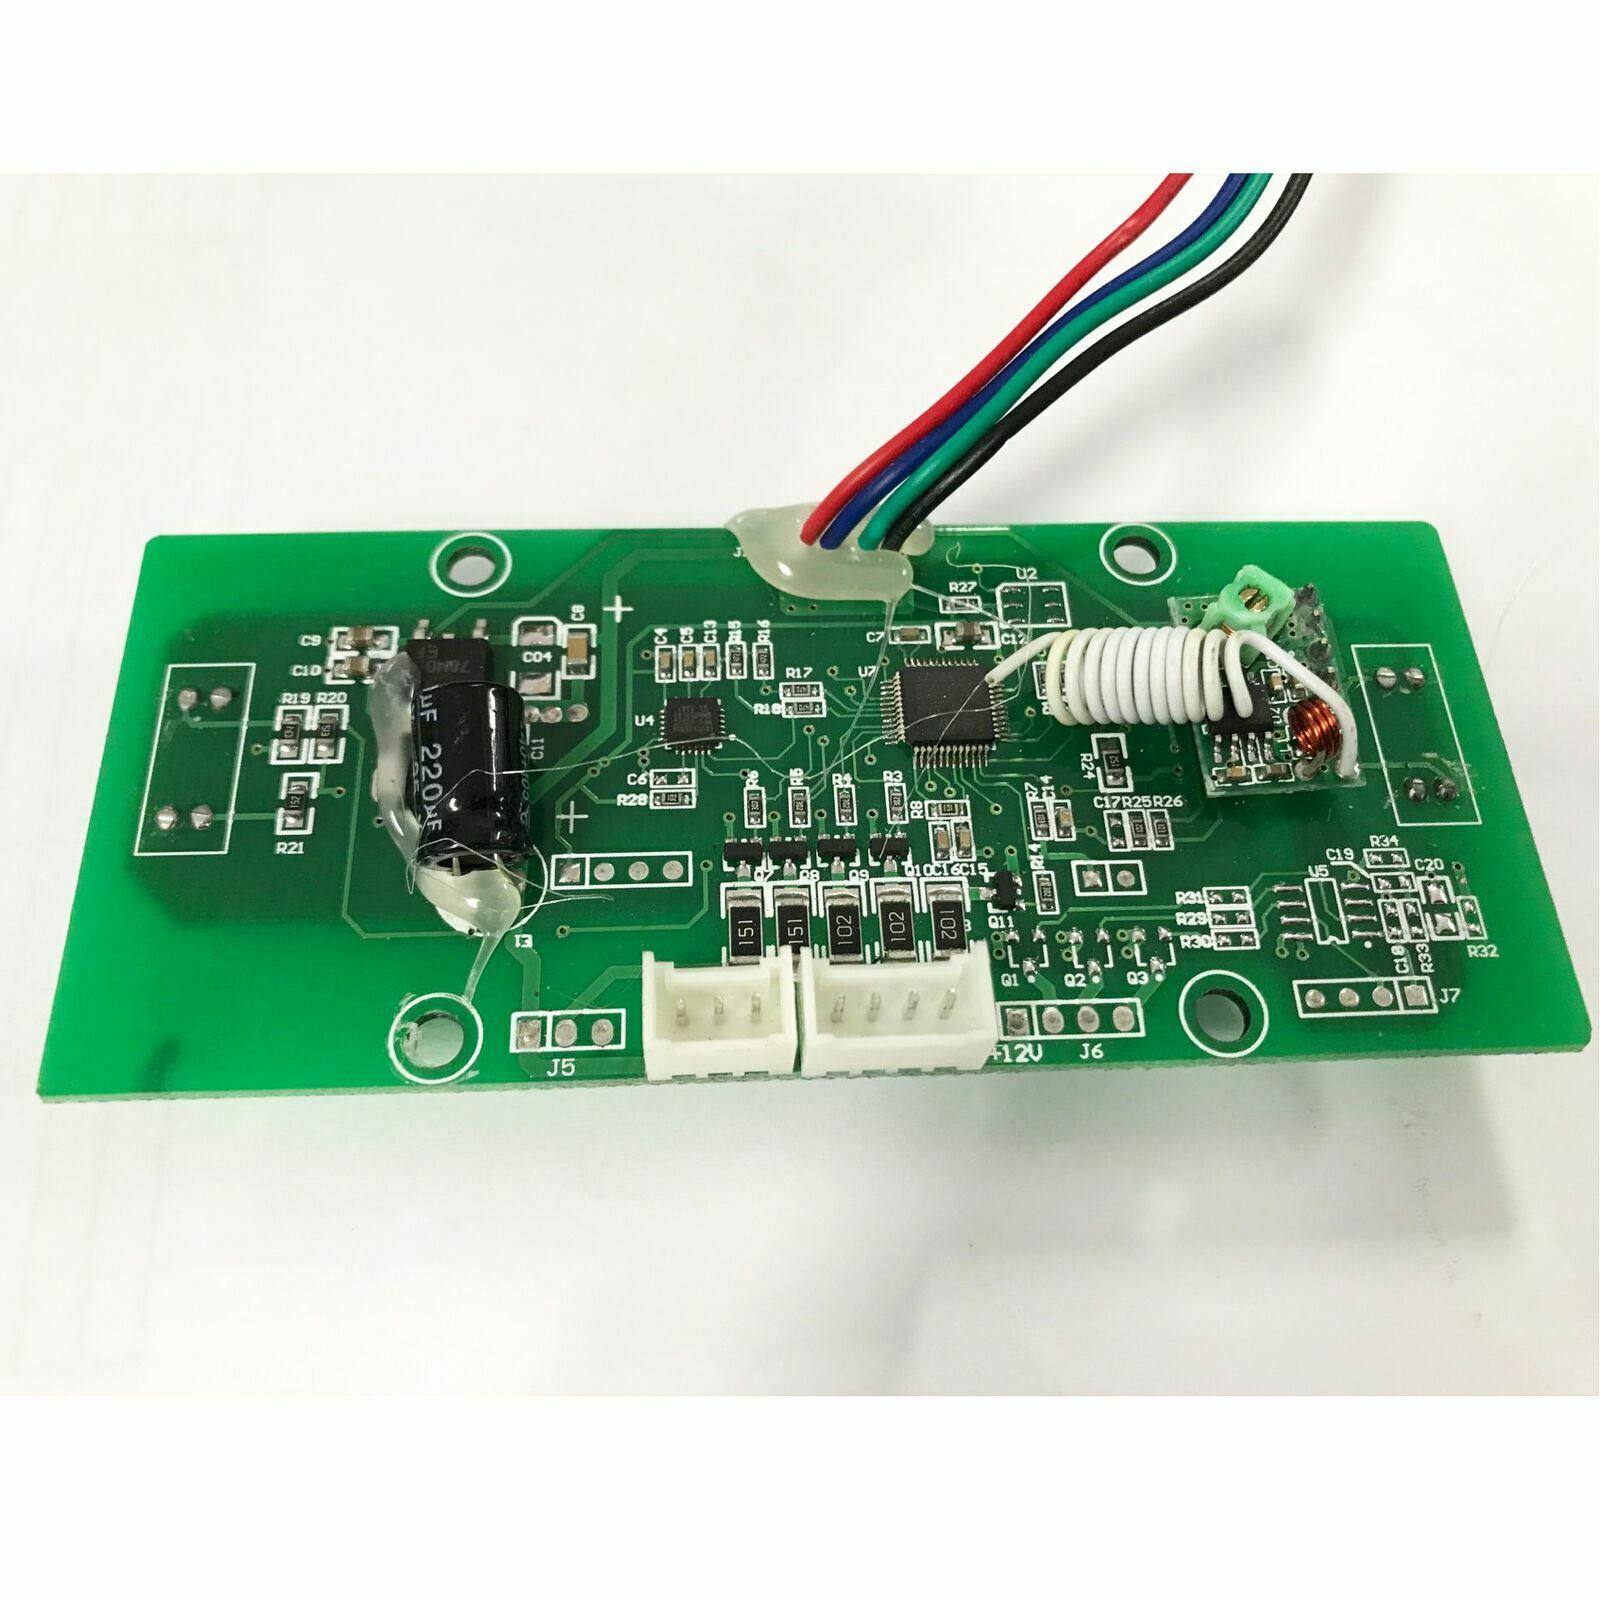 Pair of Intelligent Attitude Control board for Hoverboard Self Balancing Scooter - TDRMOTO